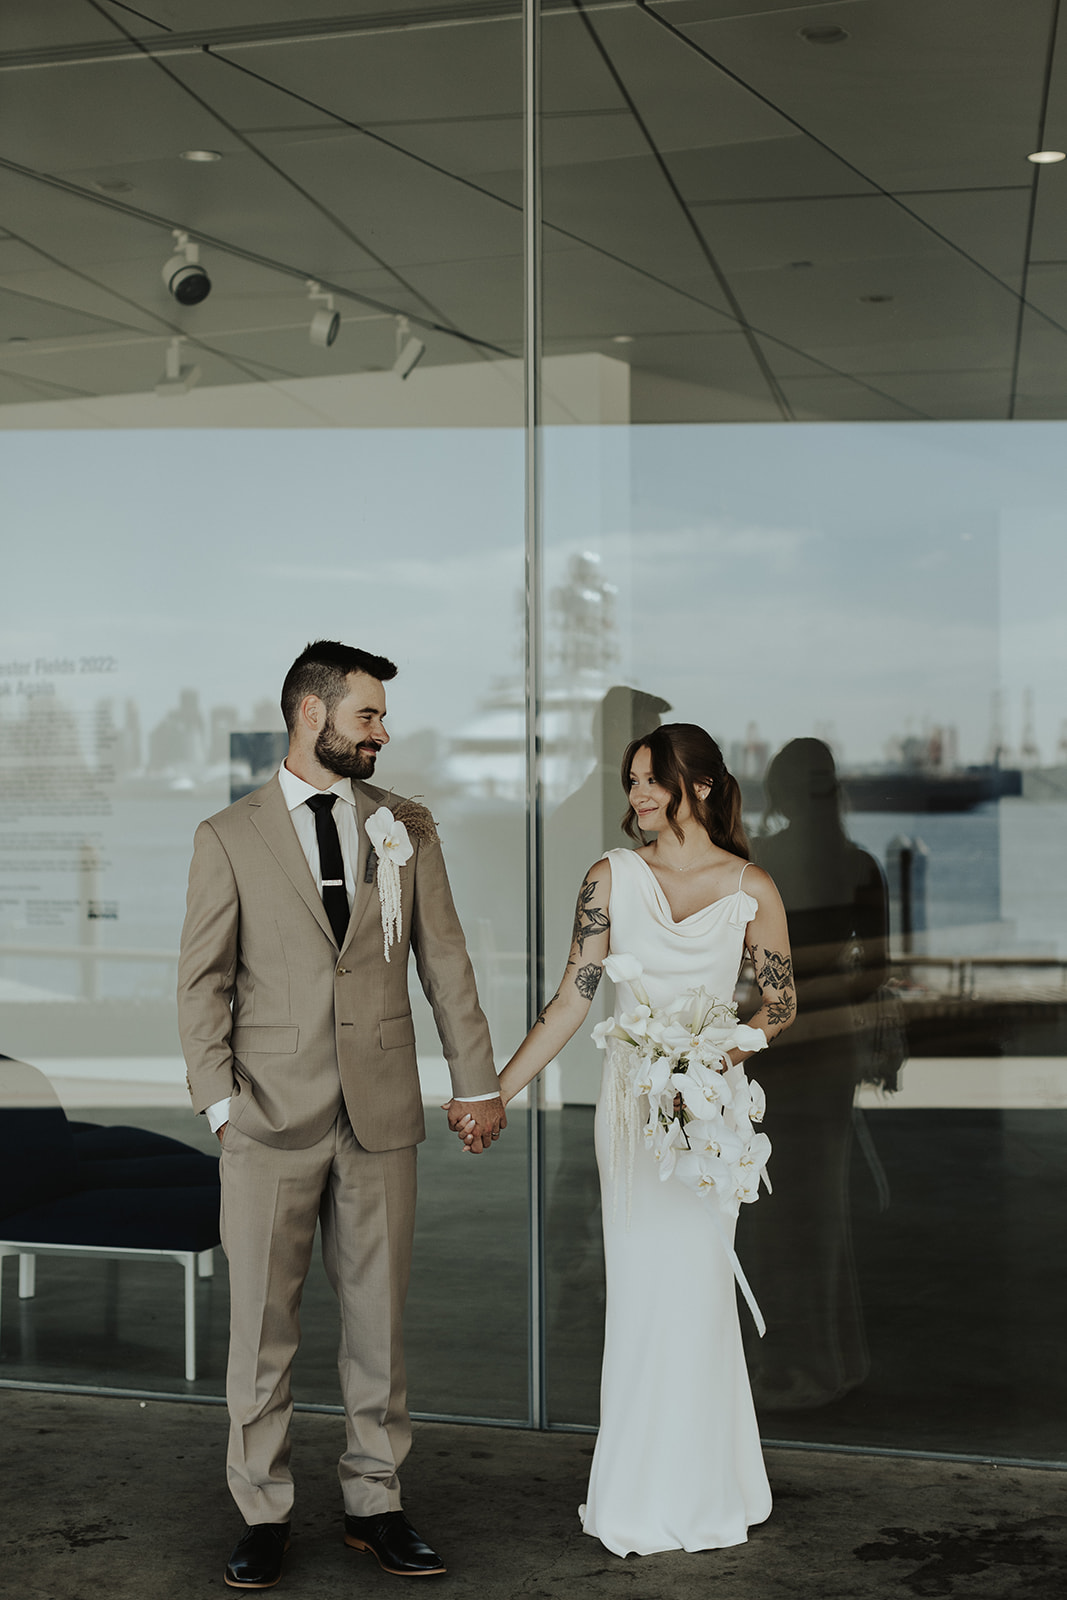 Modern tattooed bride and groom in North Vancouver, bride wearing sleek satin gown by Savannah Miller, holding stunning white orchid bouquet by The Flower Library.